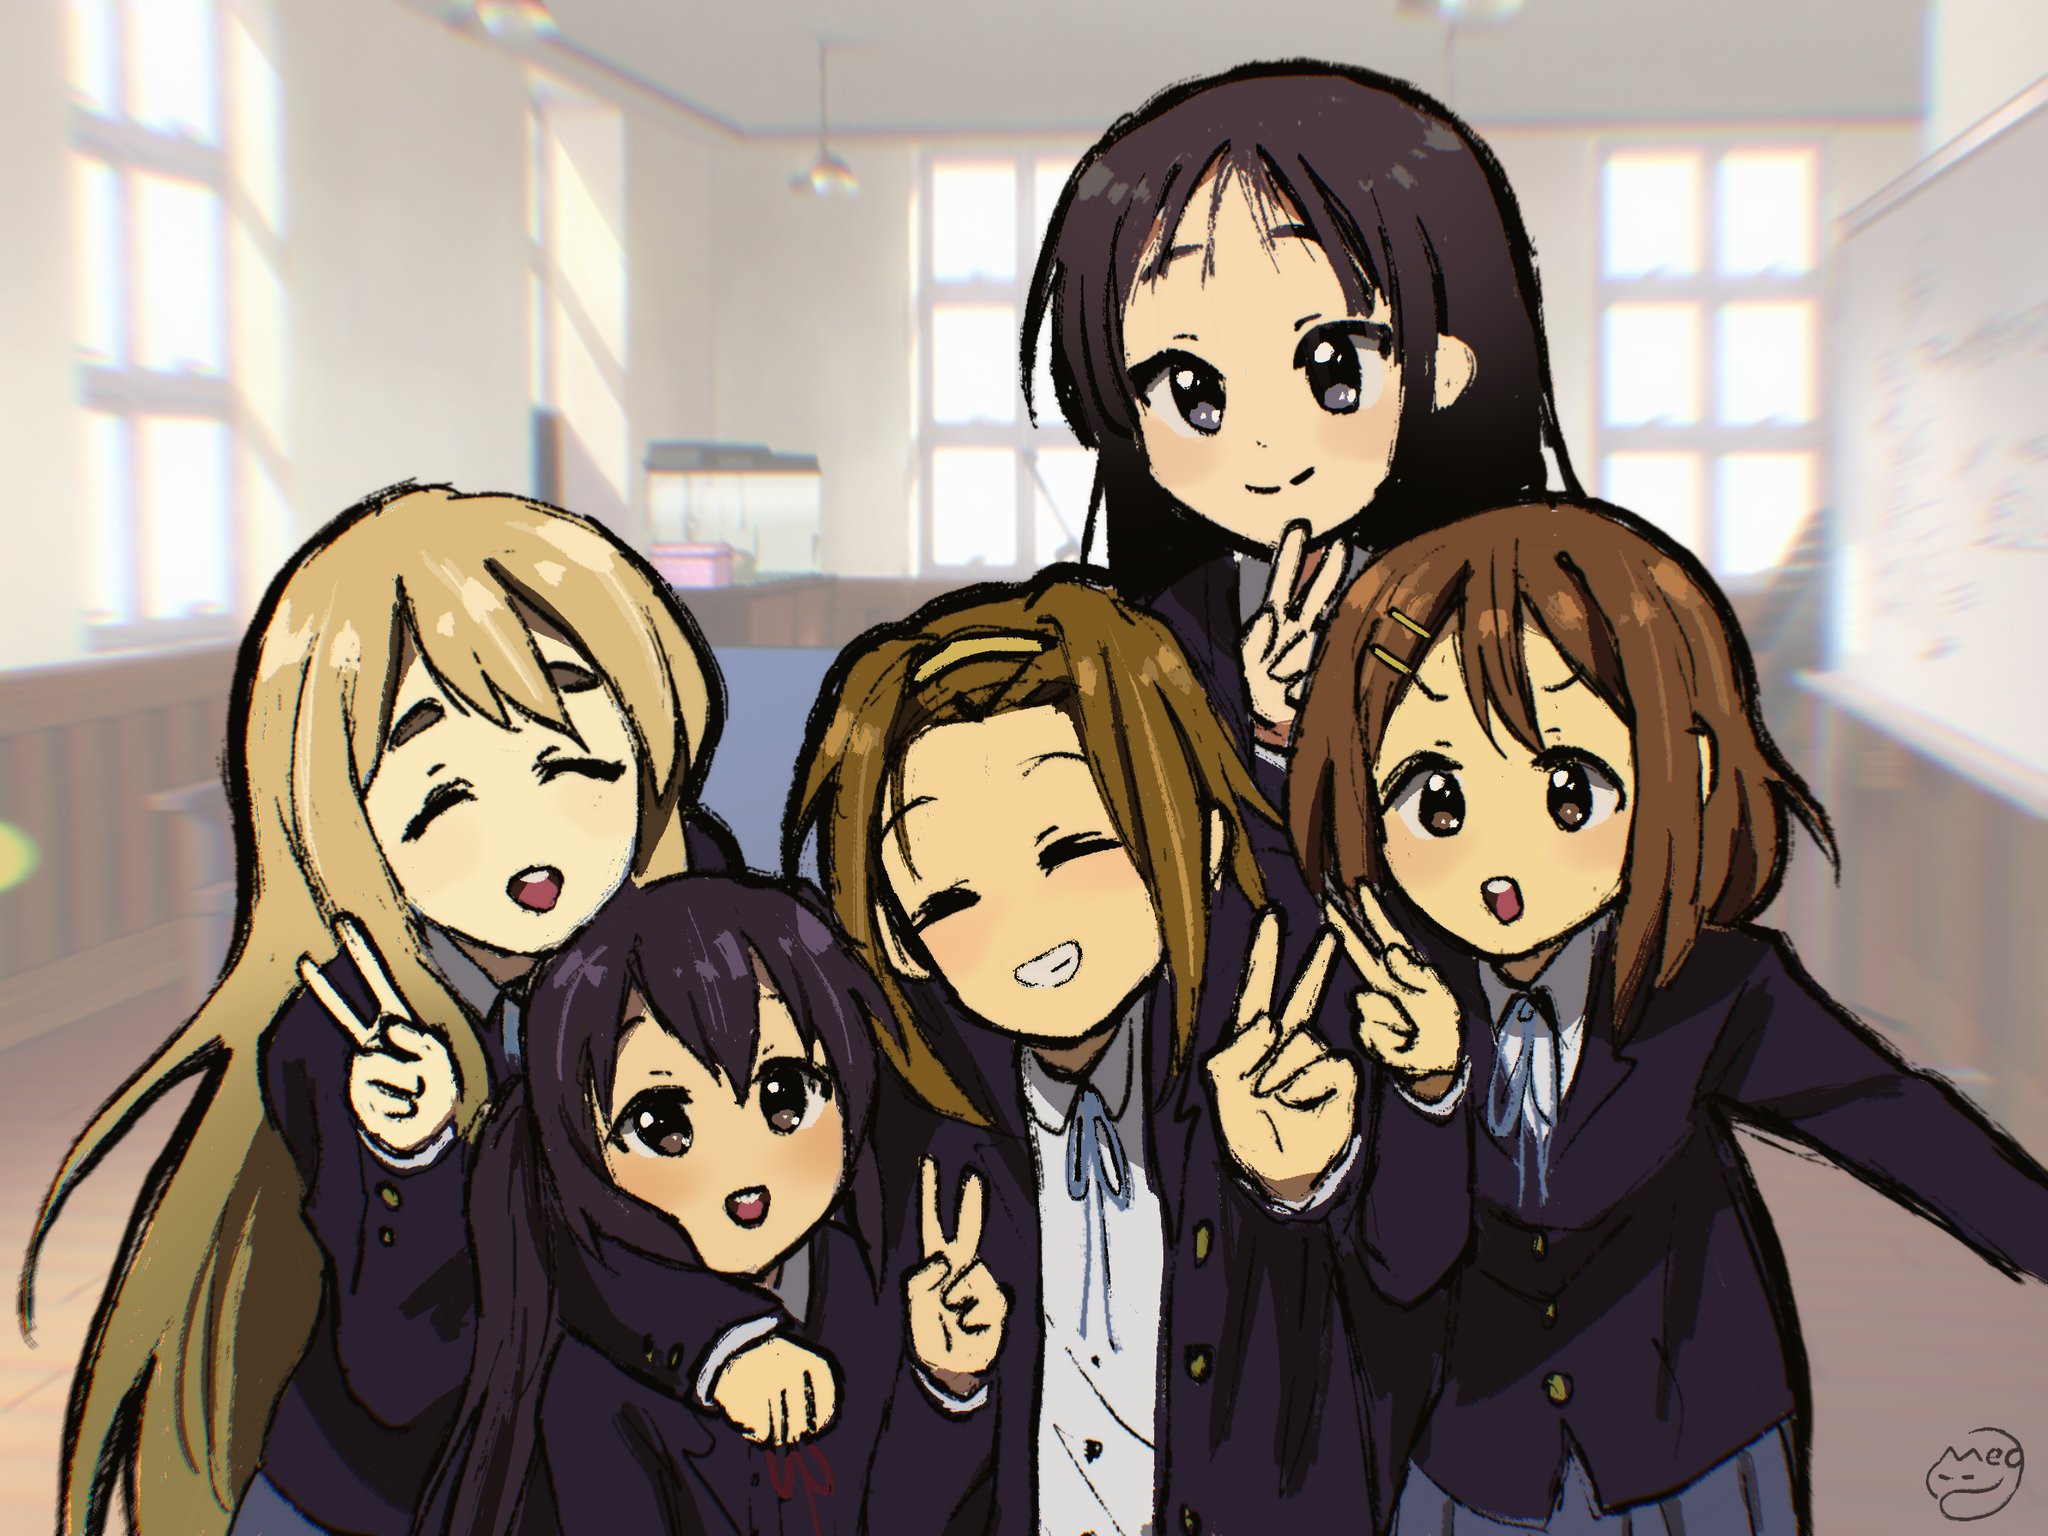 100+] K-on Wallpapers | Wallpapers.com